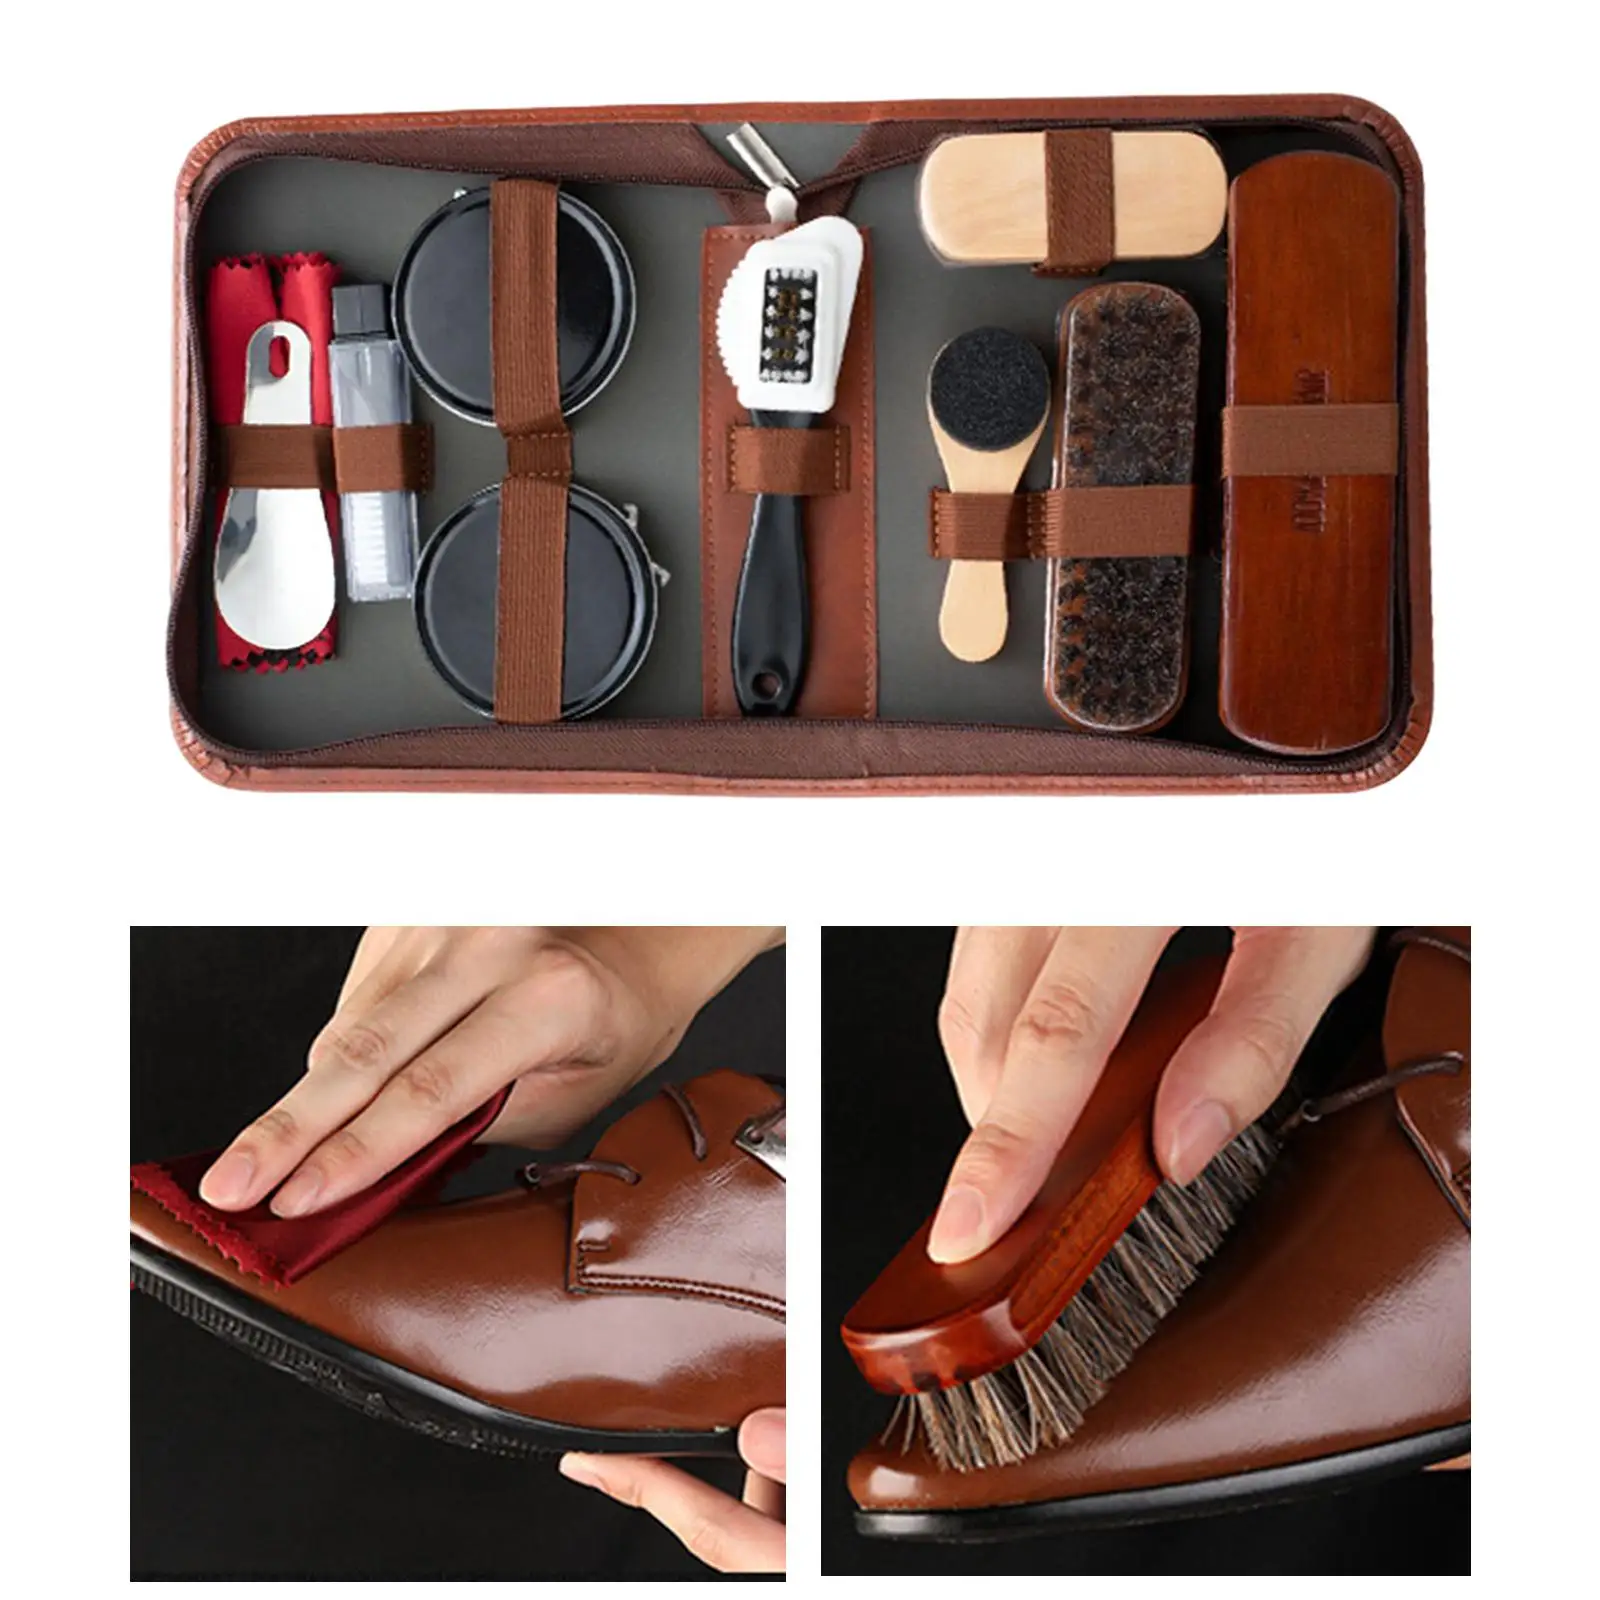 11Pcs/Set Shoes Shine Set Portable For Boots Sneakers Cleaning Set Brush Shine Polishing Tool For Leather Shoes